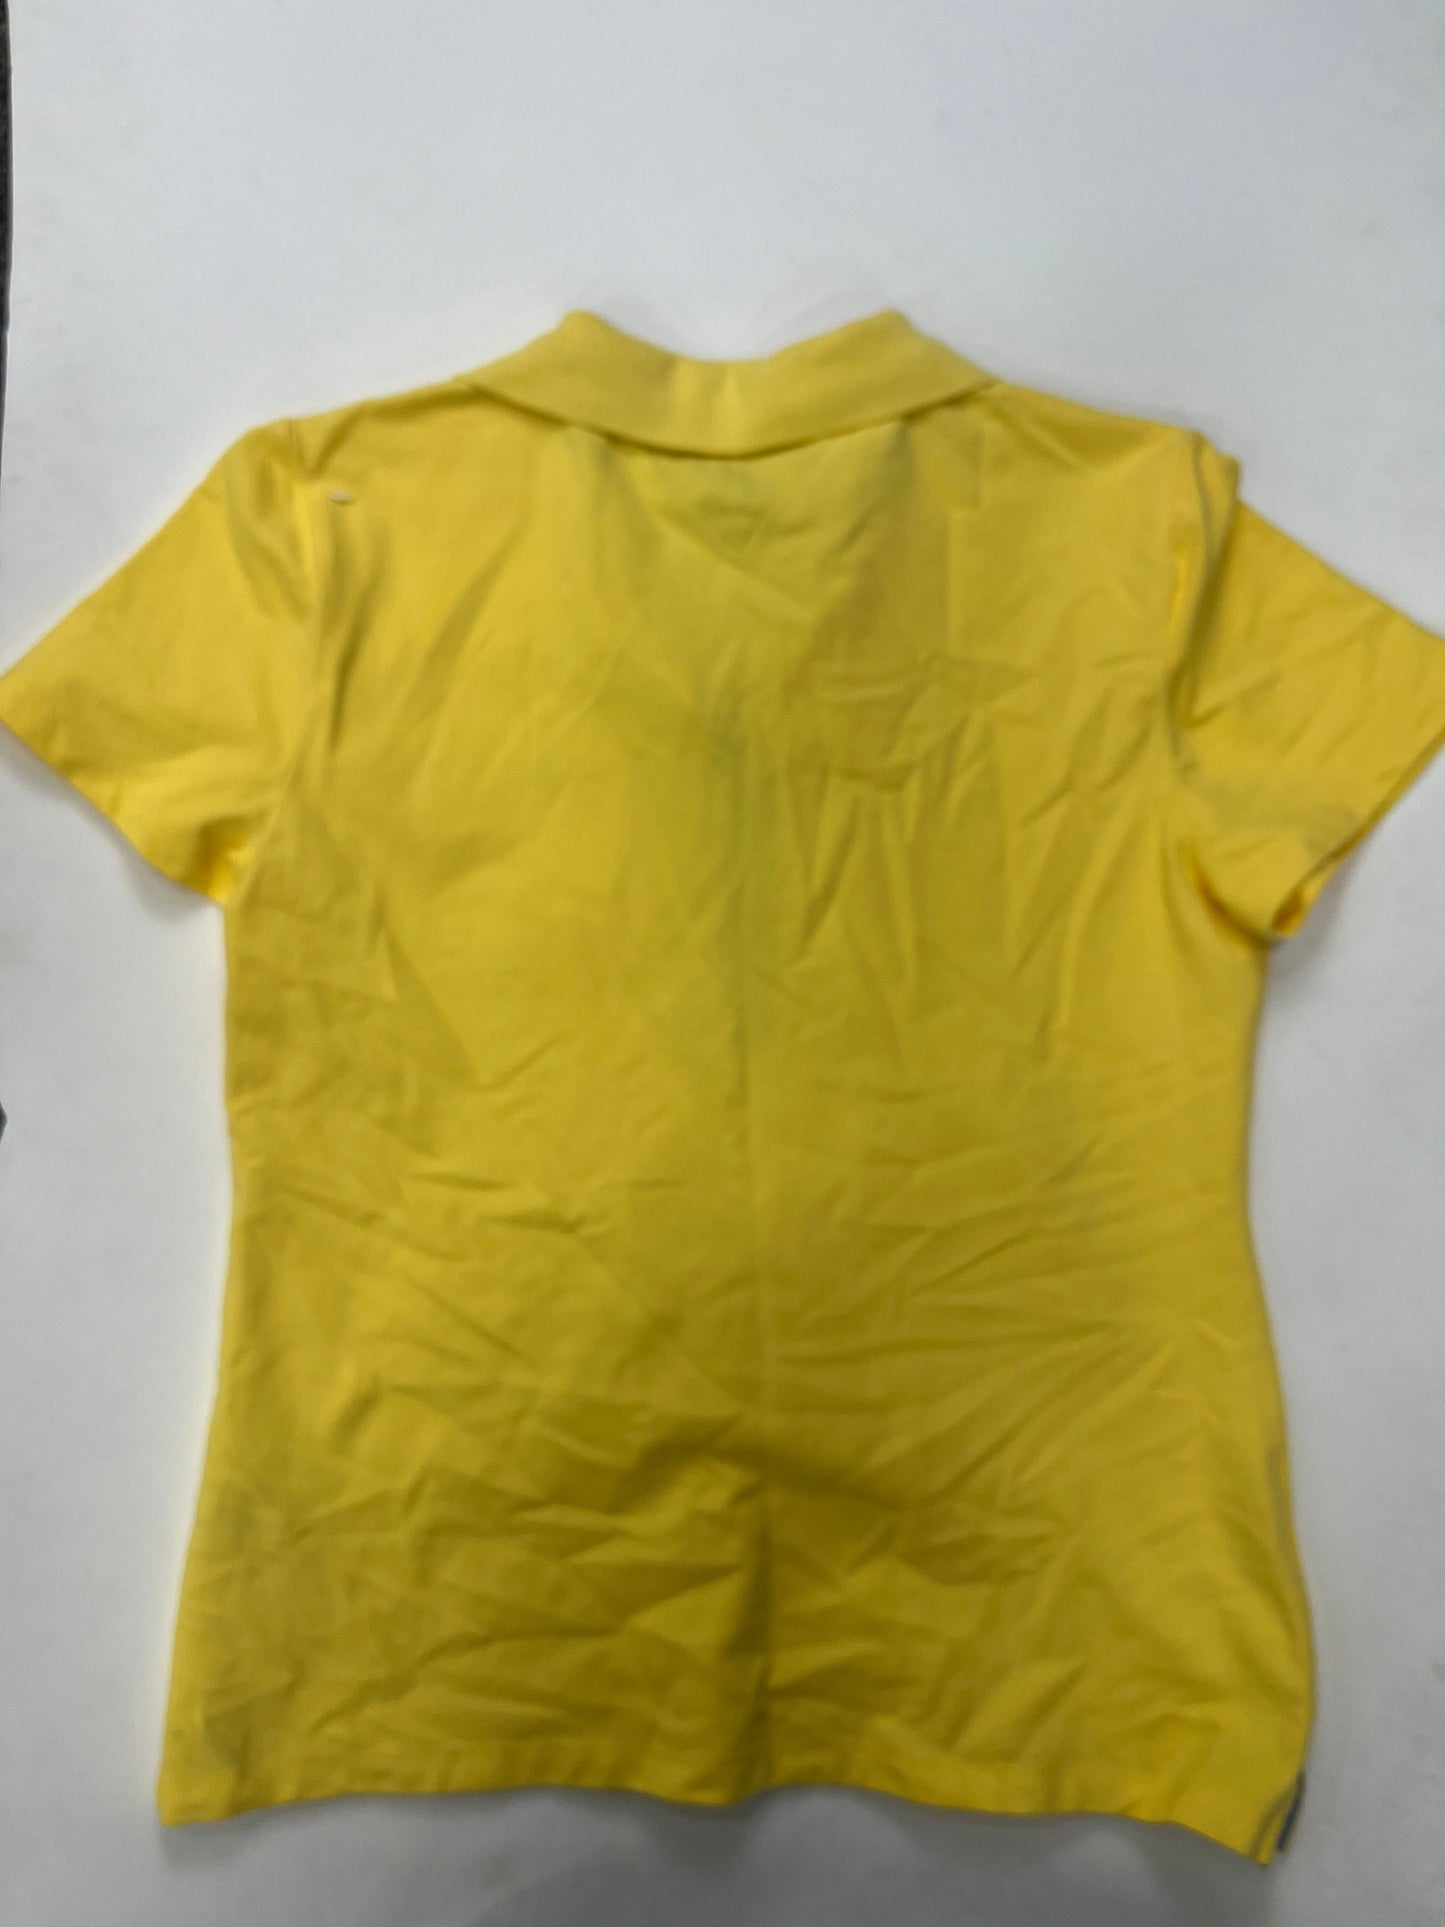 Yellow Top Short Sleeve Tommy Hilfiger, Size M